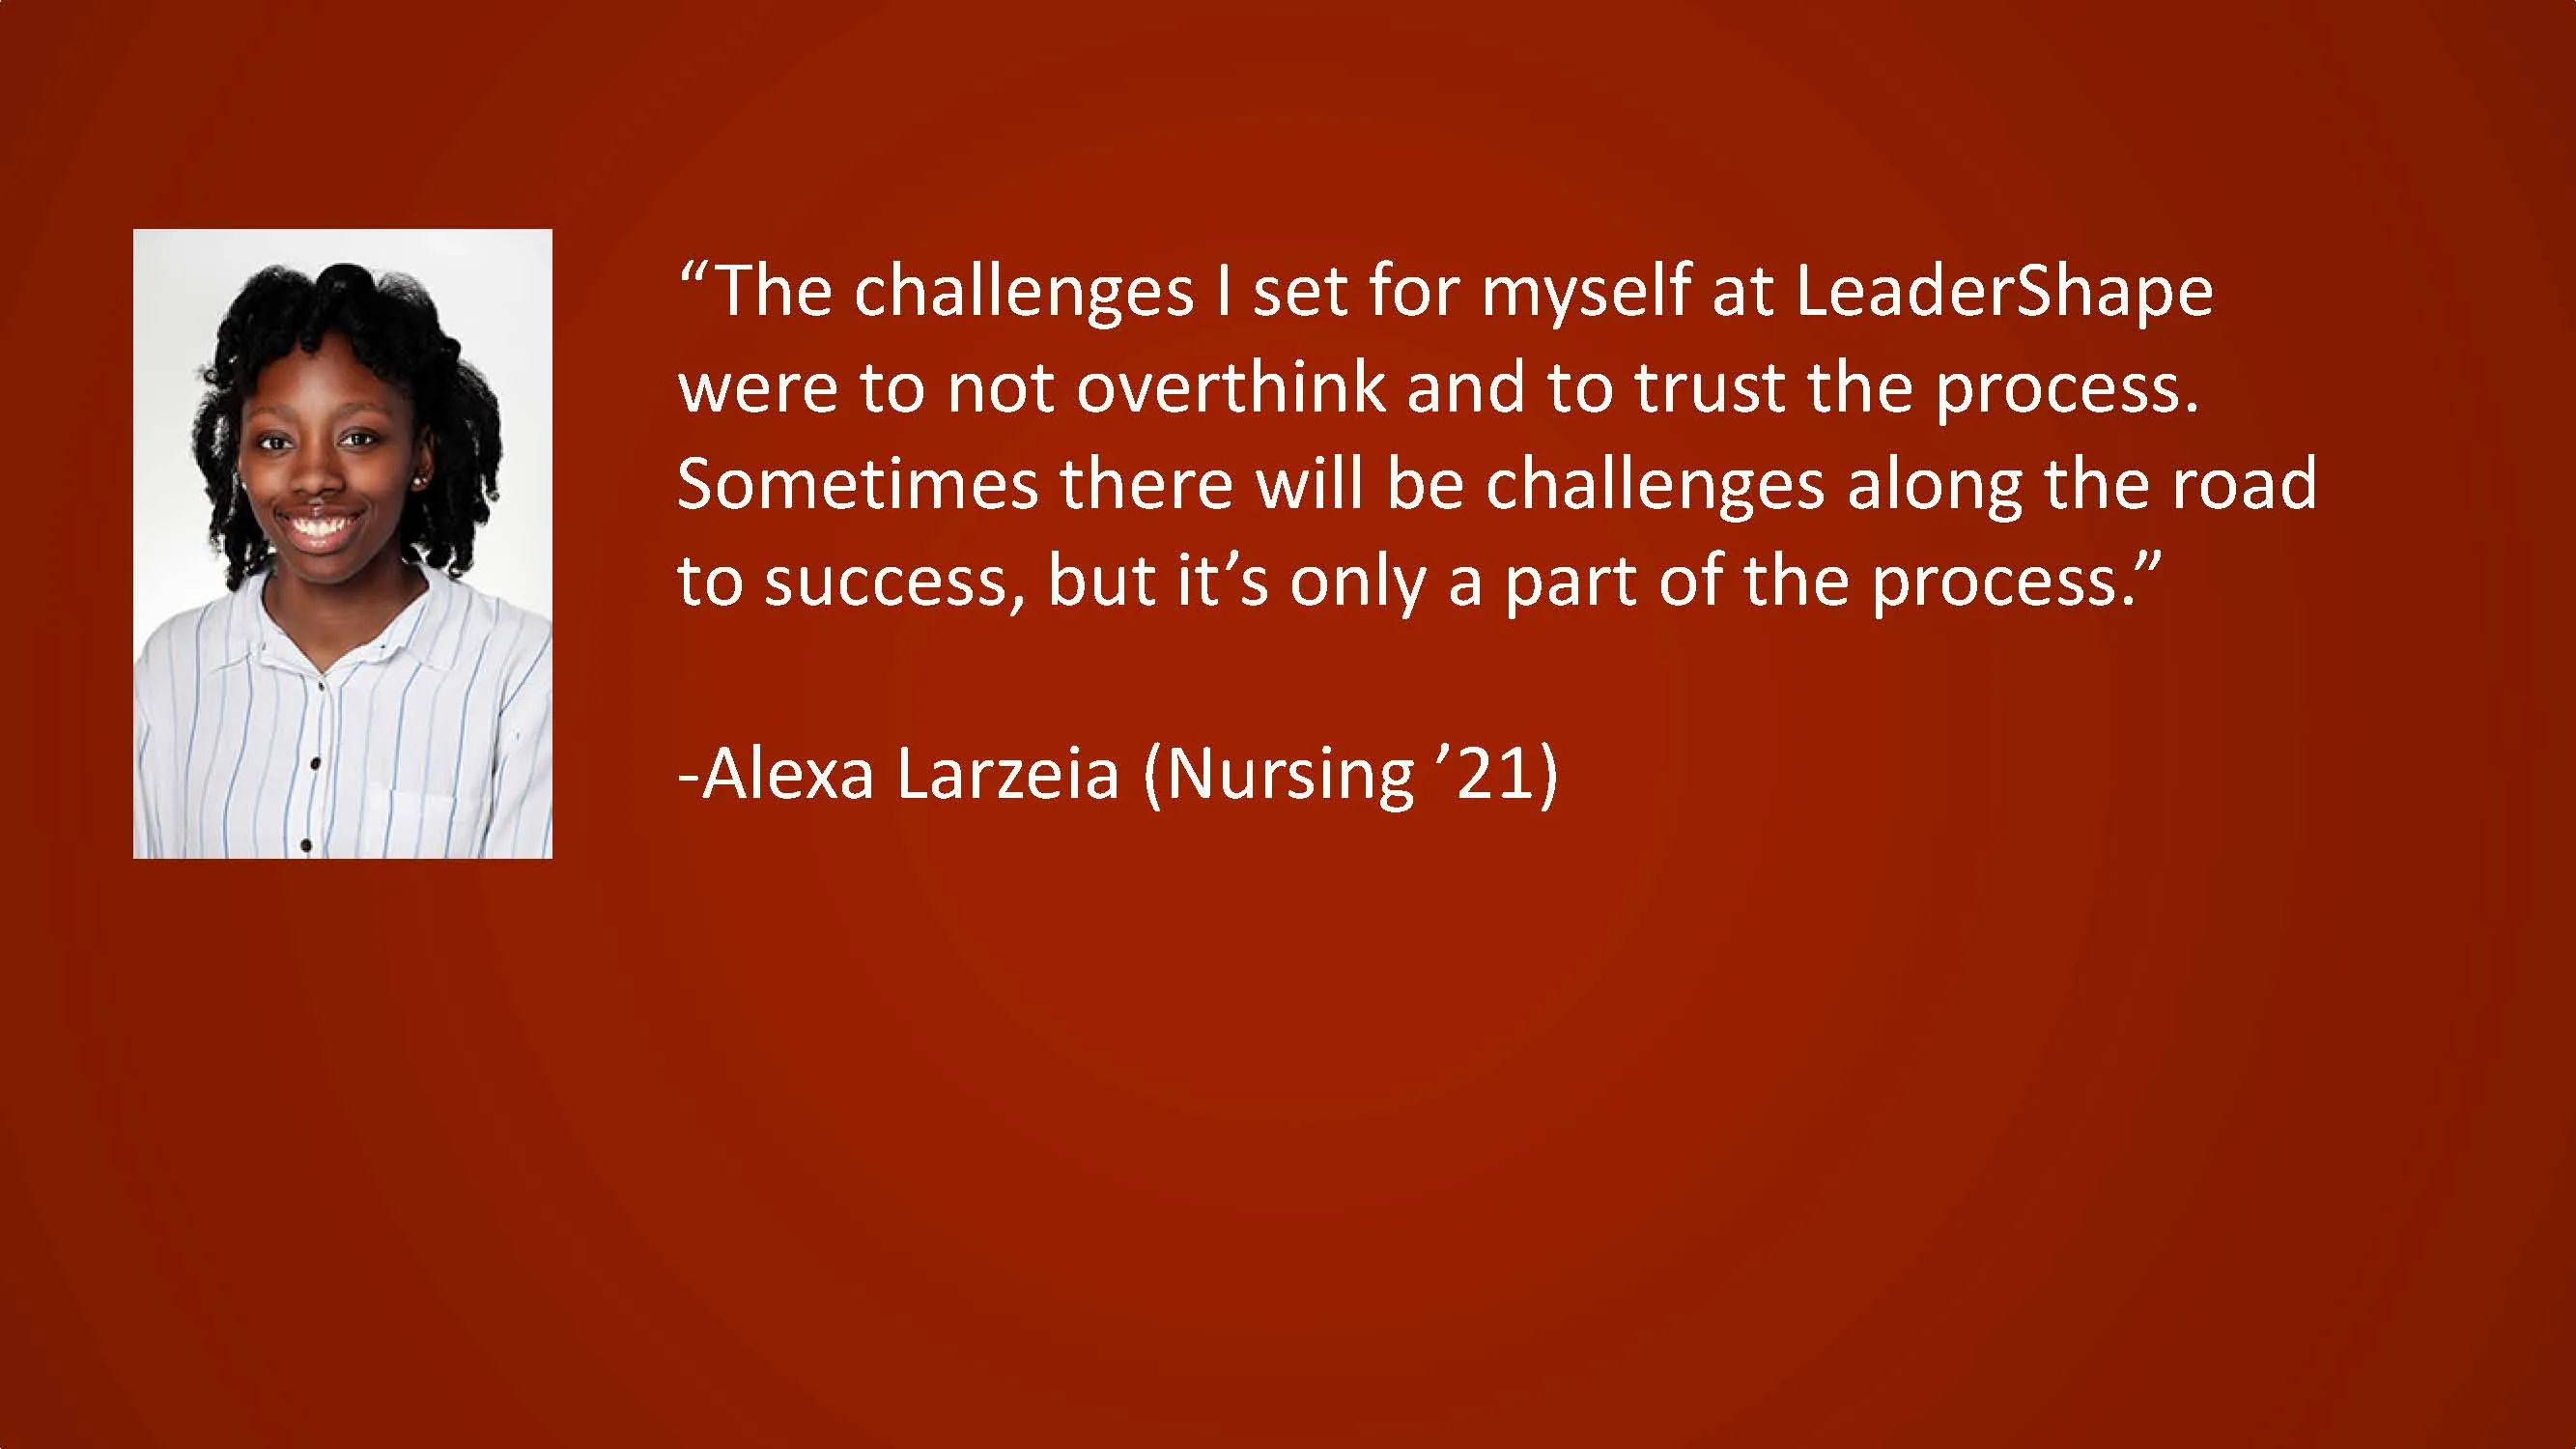 The challenges I set for myself at LeaderShape were to not overthink and to trust the process. Sometimes there will be challenges along the road to success, but it's only a part of the process. — Alexa Larzeia, (Nursing '21)